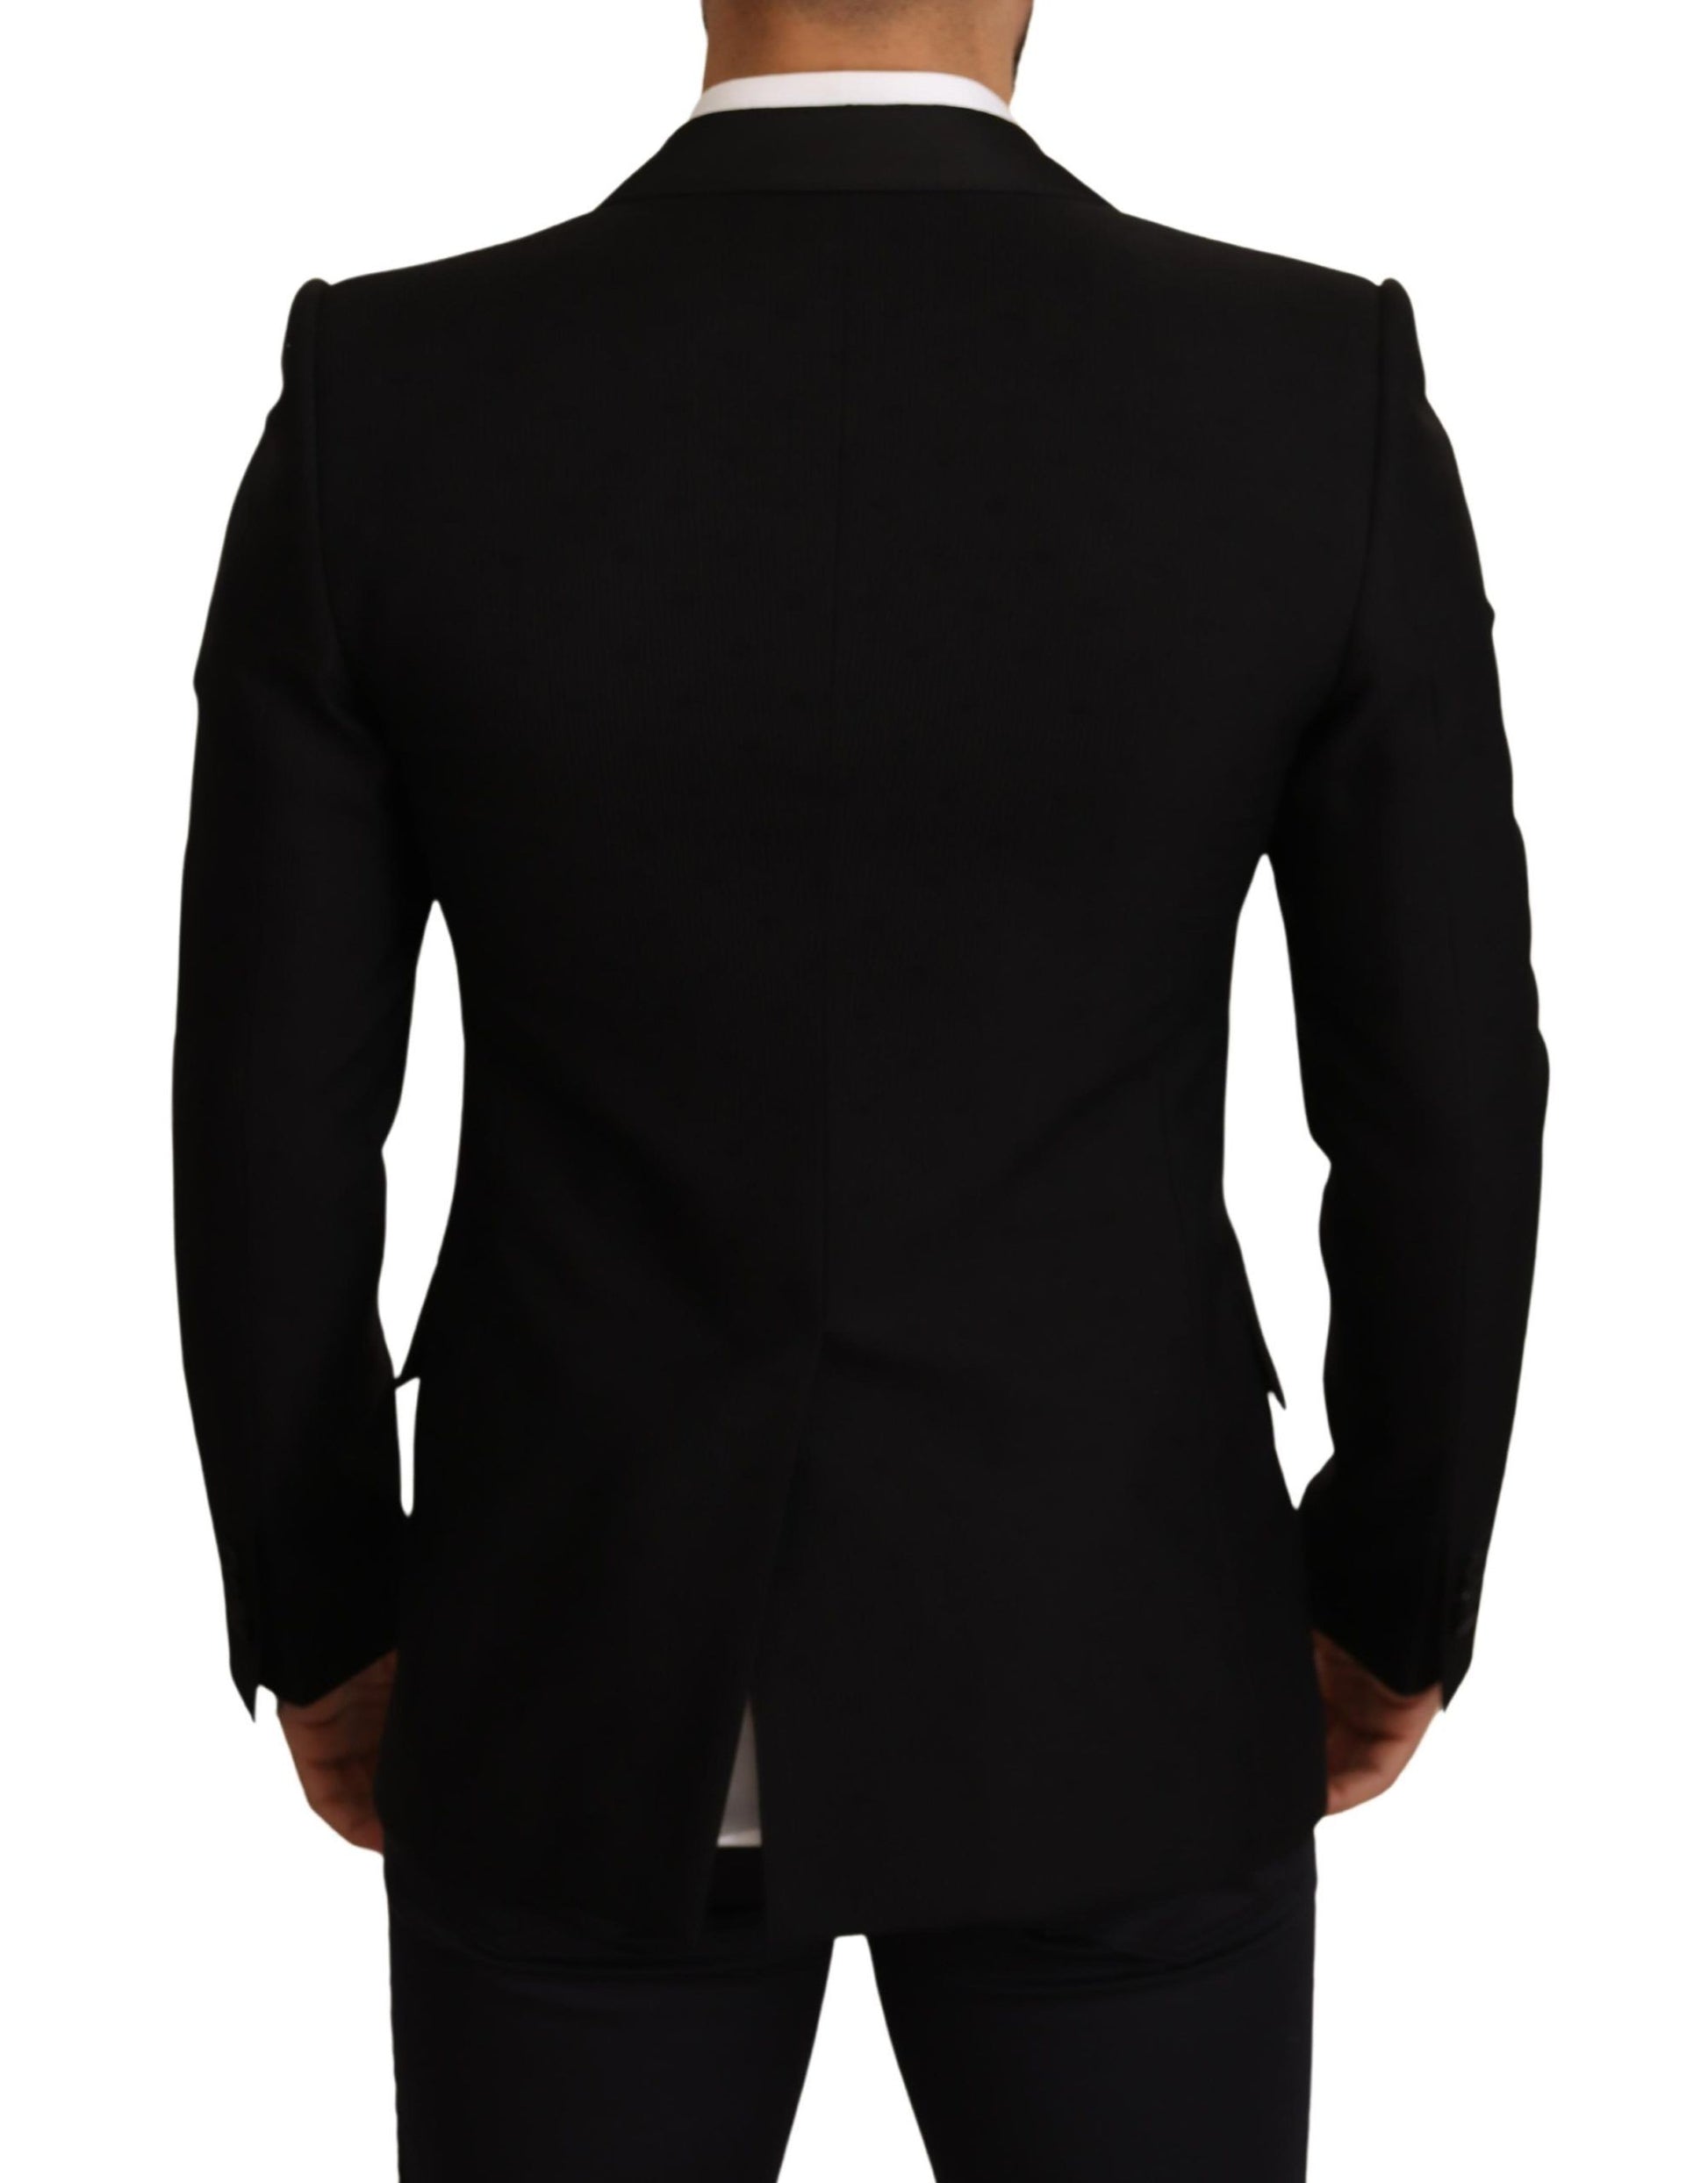 Black Wool Slim Fit Coat Blazer Jacket - Designed by Dolce & Gabbana Available to Buy at a Discounted Price on Moon Behind The Hill Online Designer Discount Store